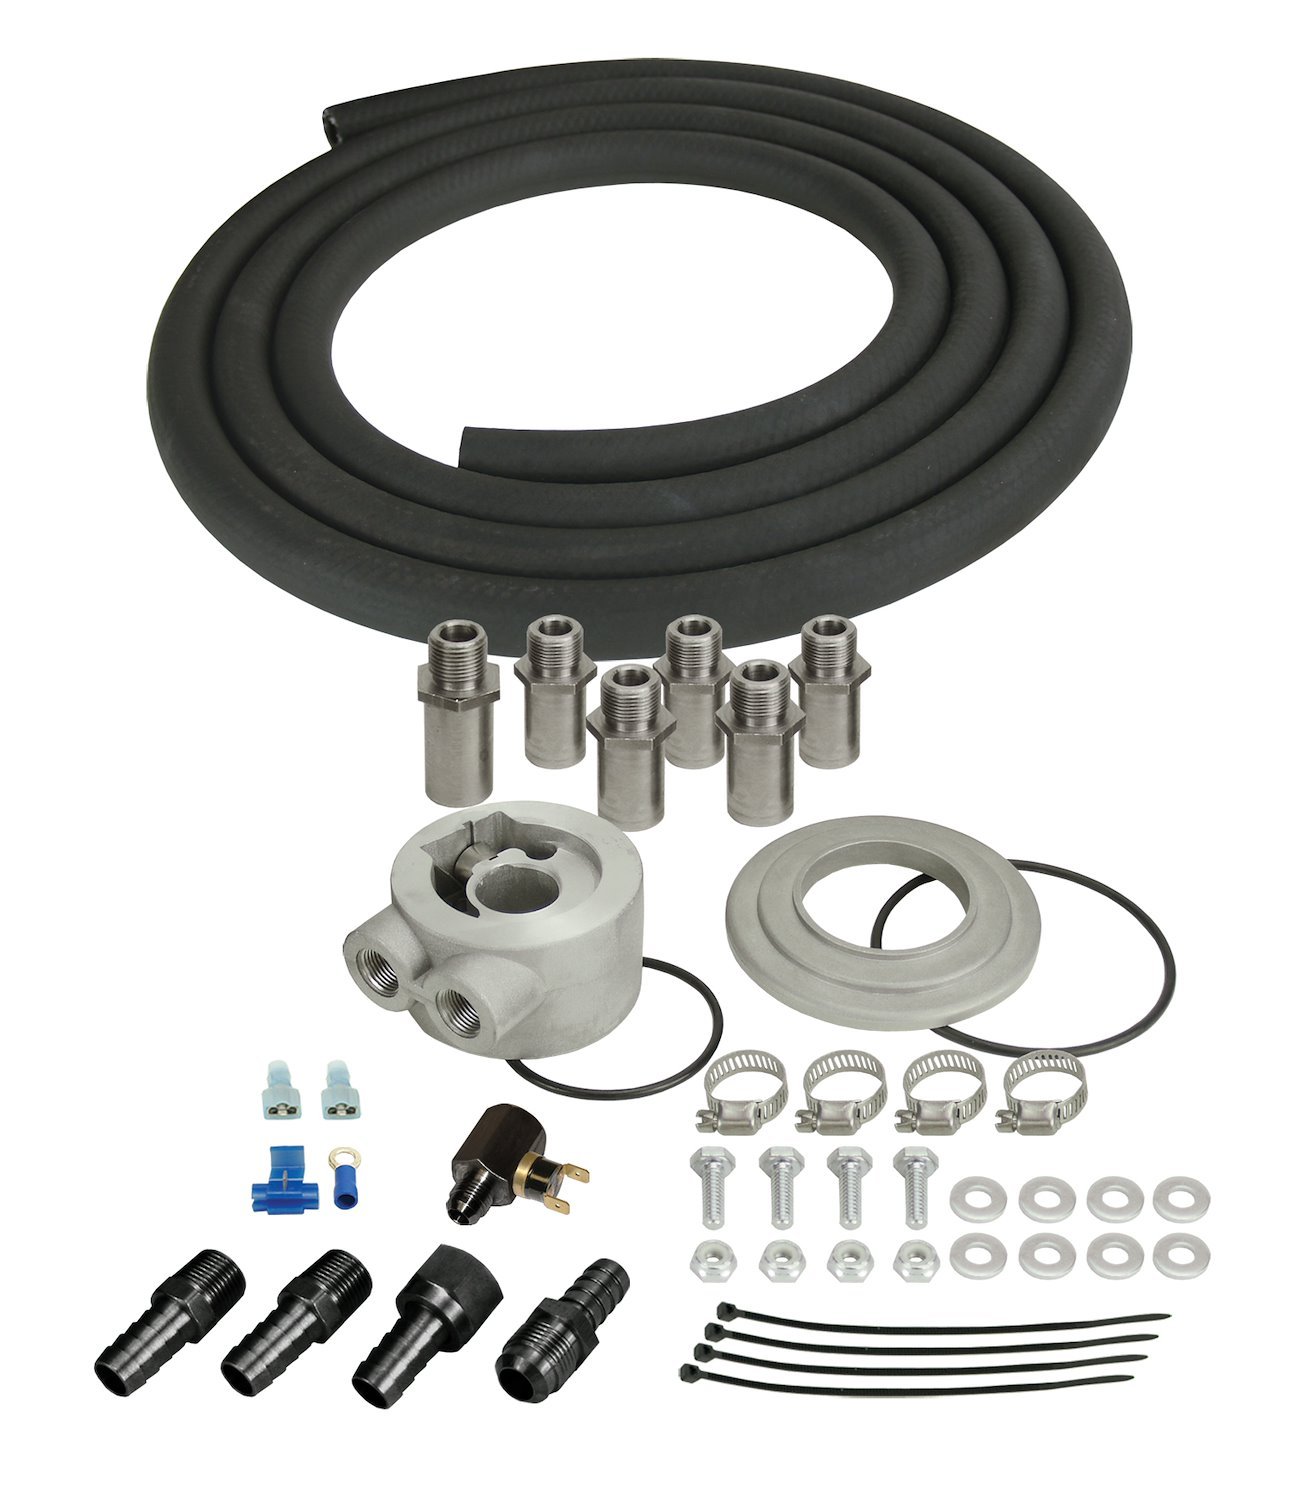 Remote Oil Cooler Installation Kit Universal fit